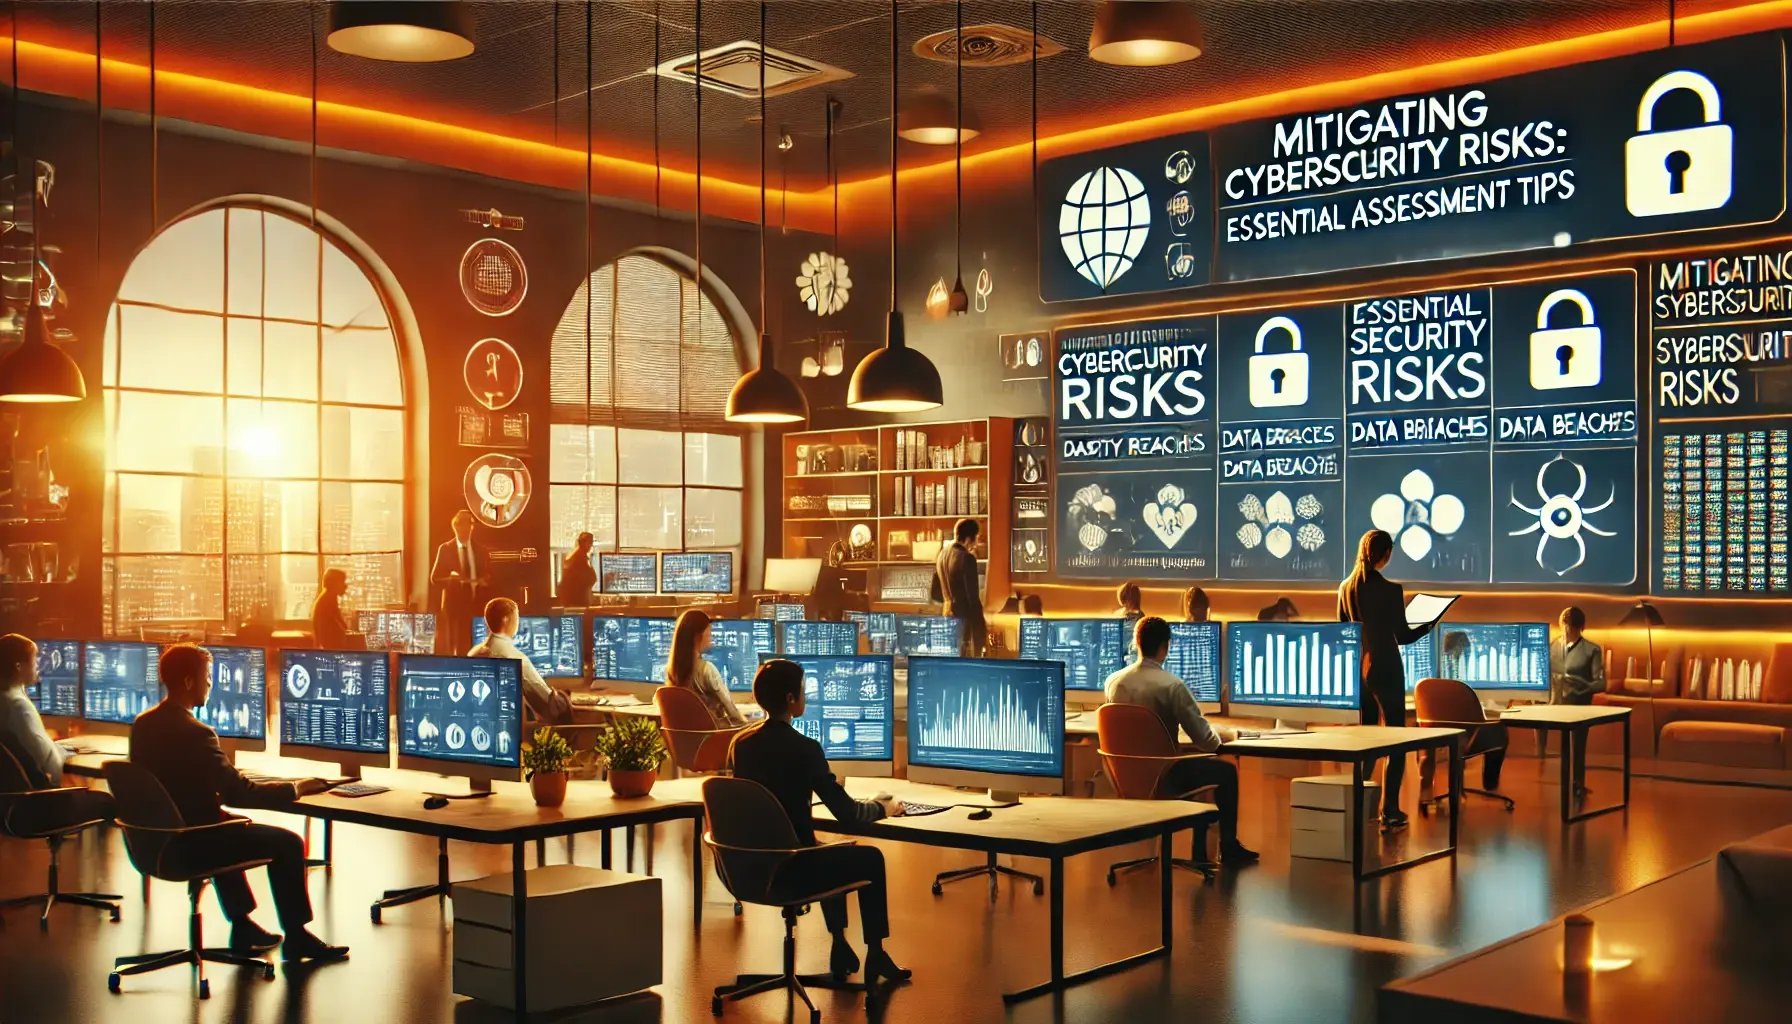 Mitigating Cybersecurity Risks: Essential Assessment Tips